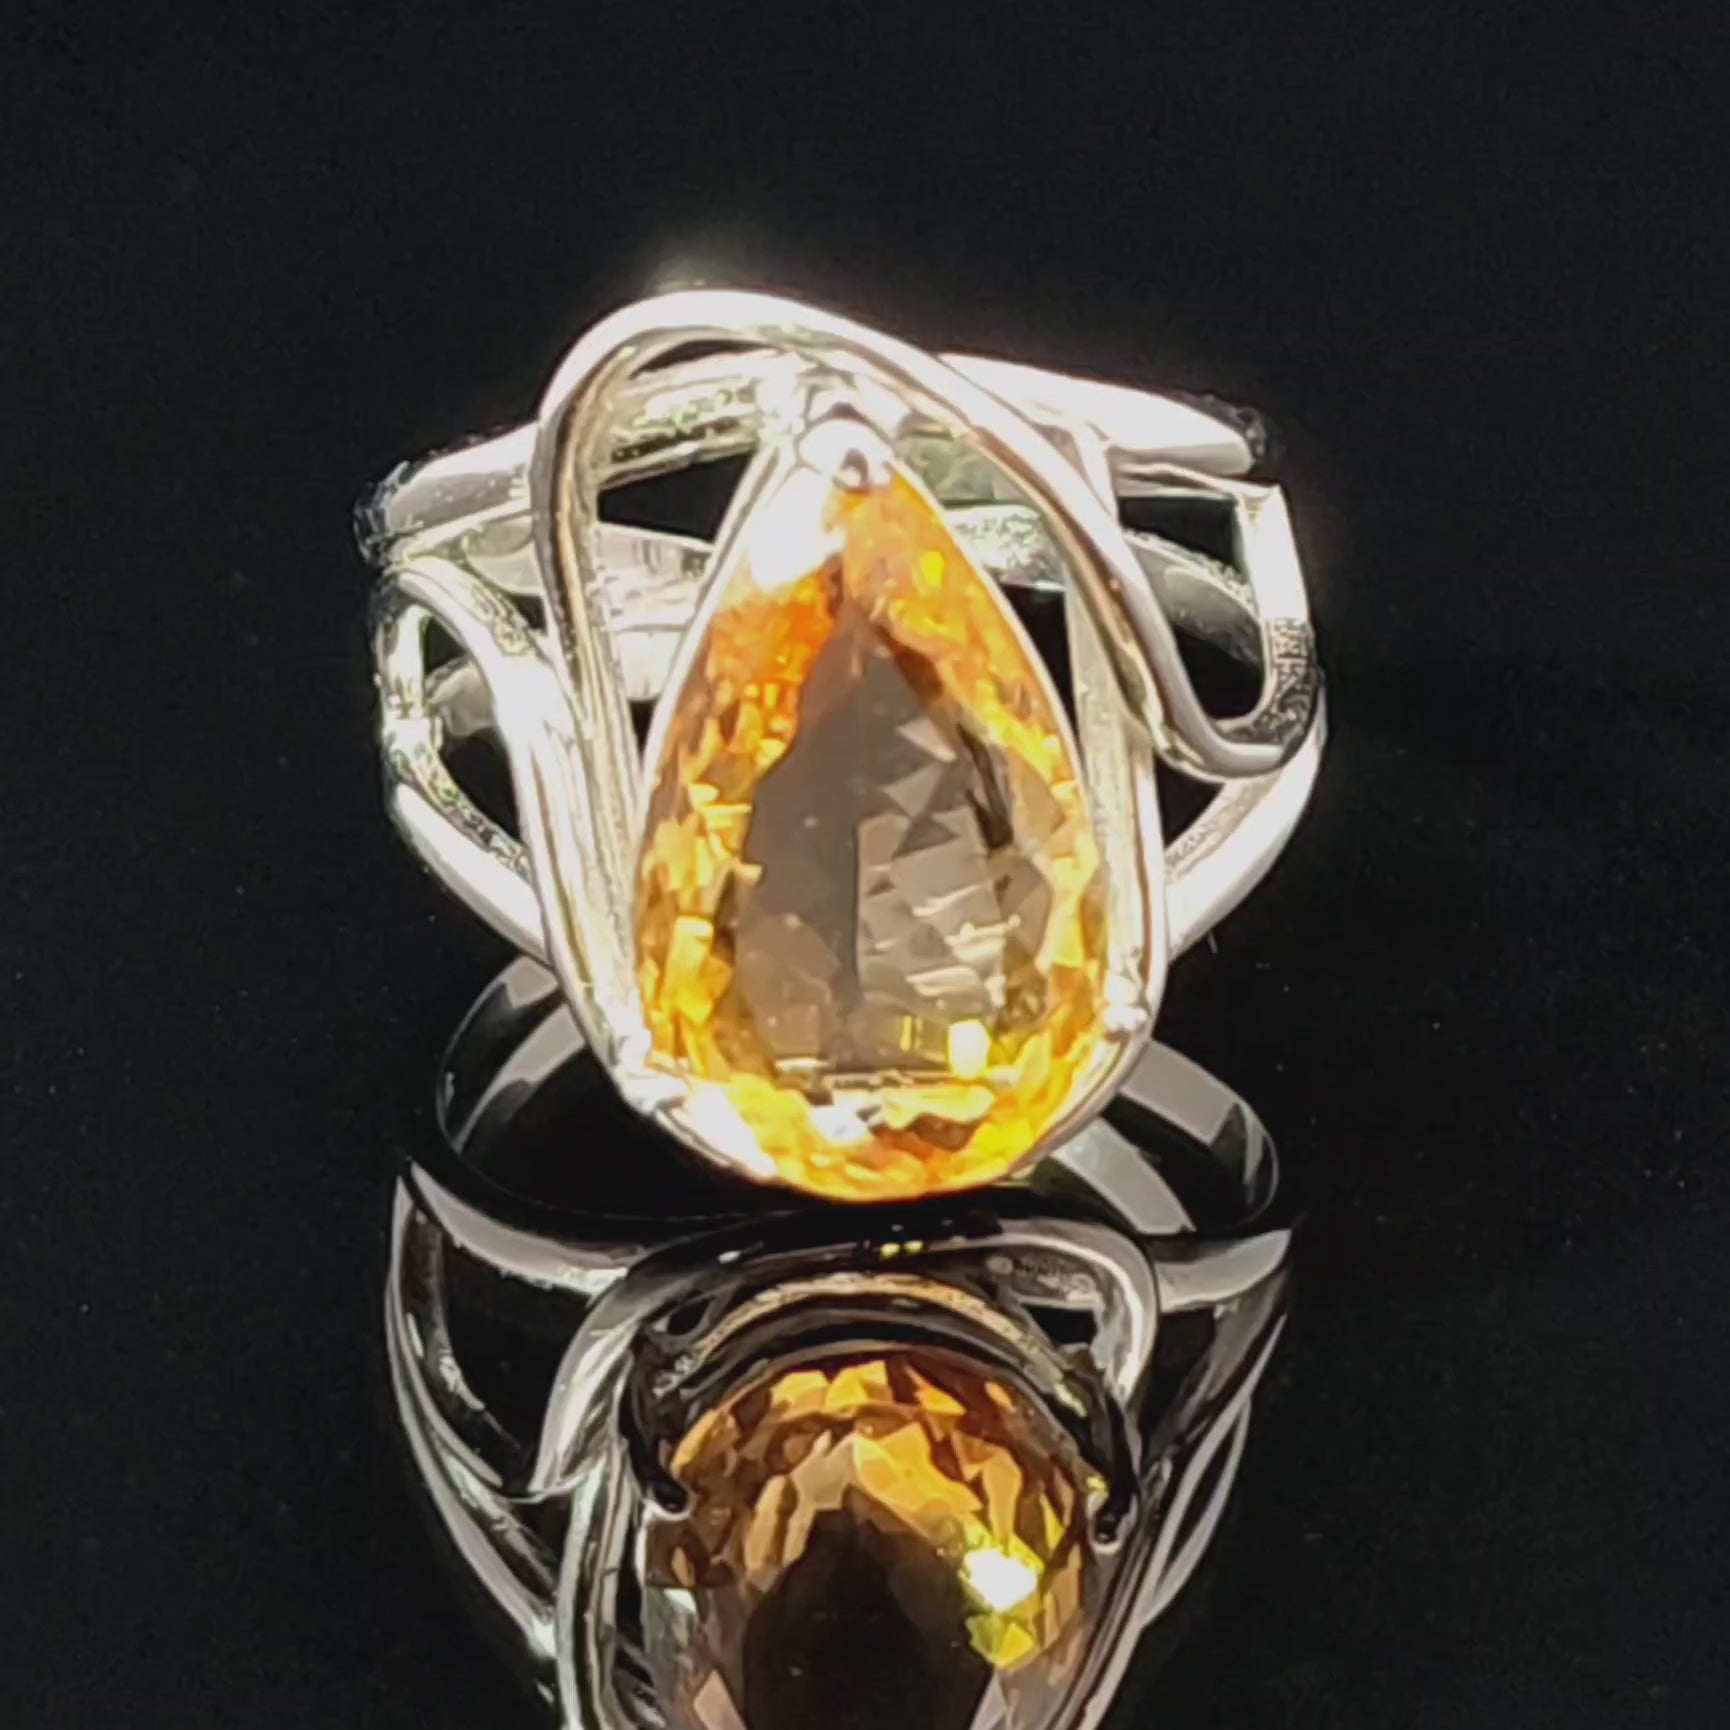 Madeira Citrine Adjustable Finger Cuff Ring .925 Silver for Abundance, Good Luck and Positivity